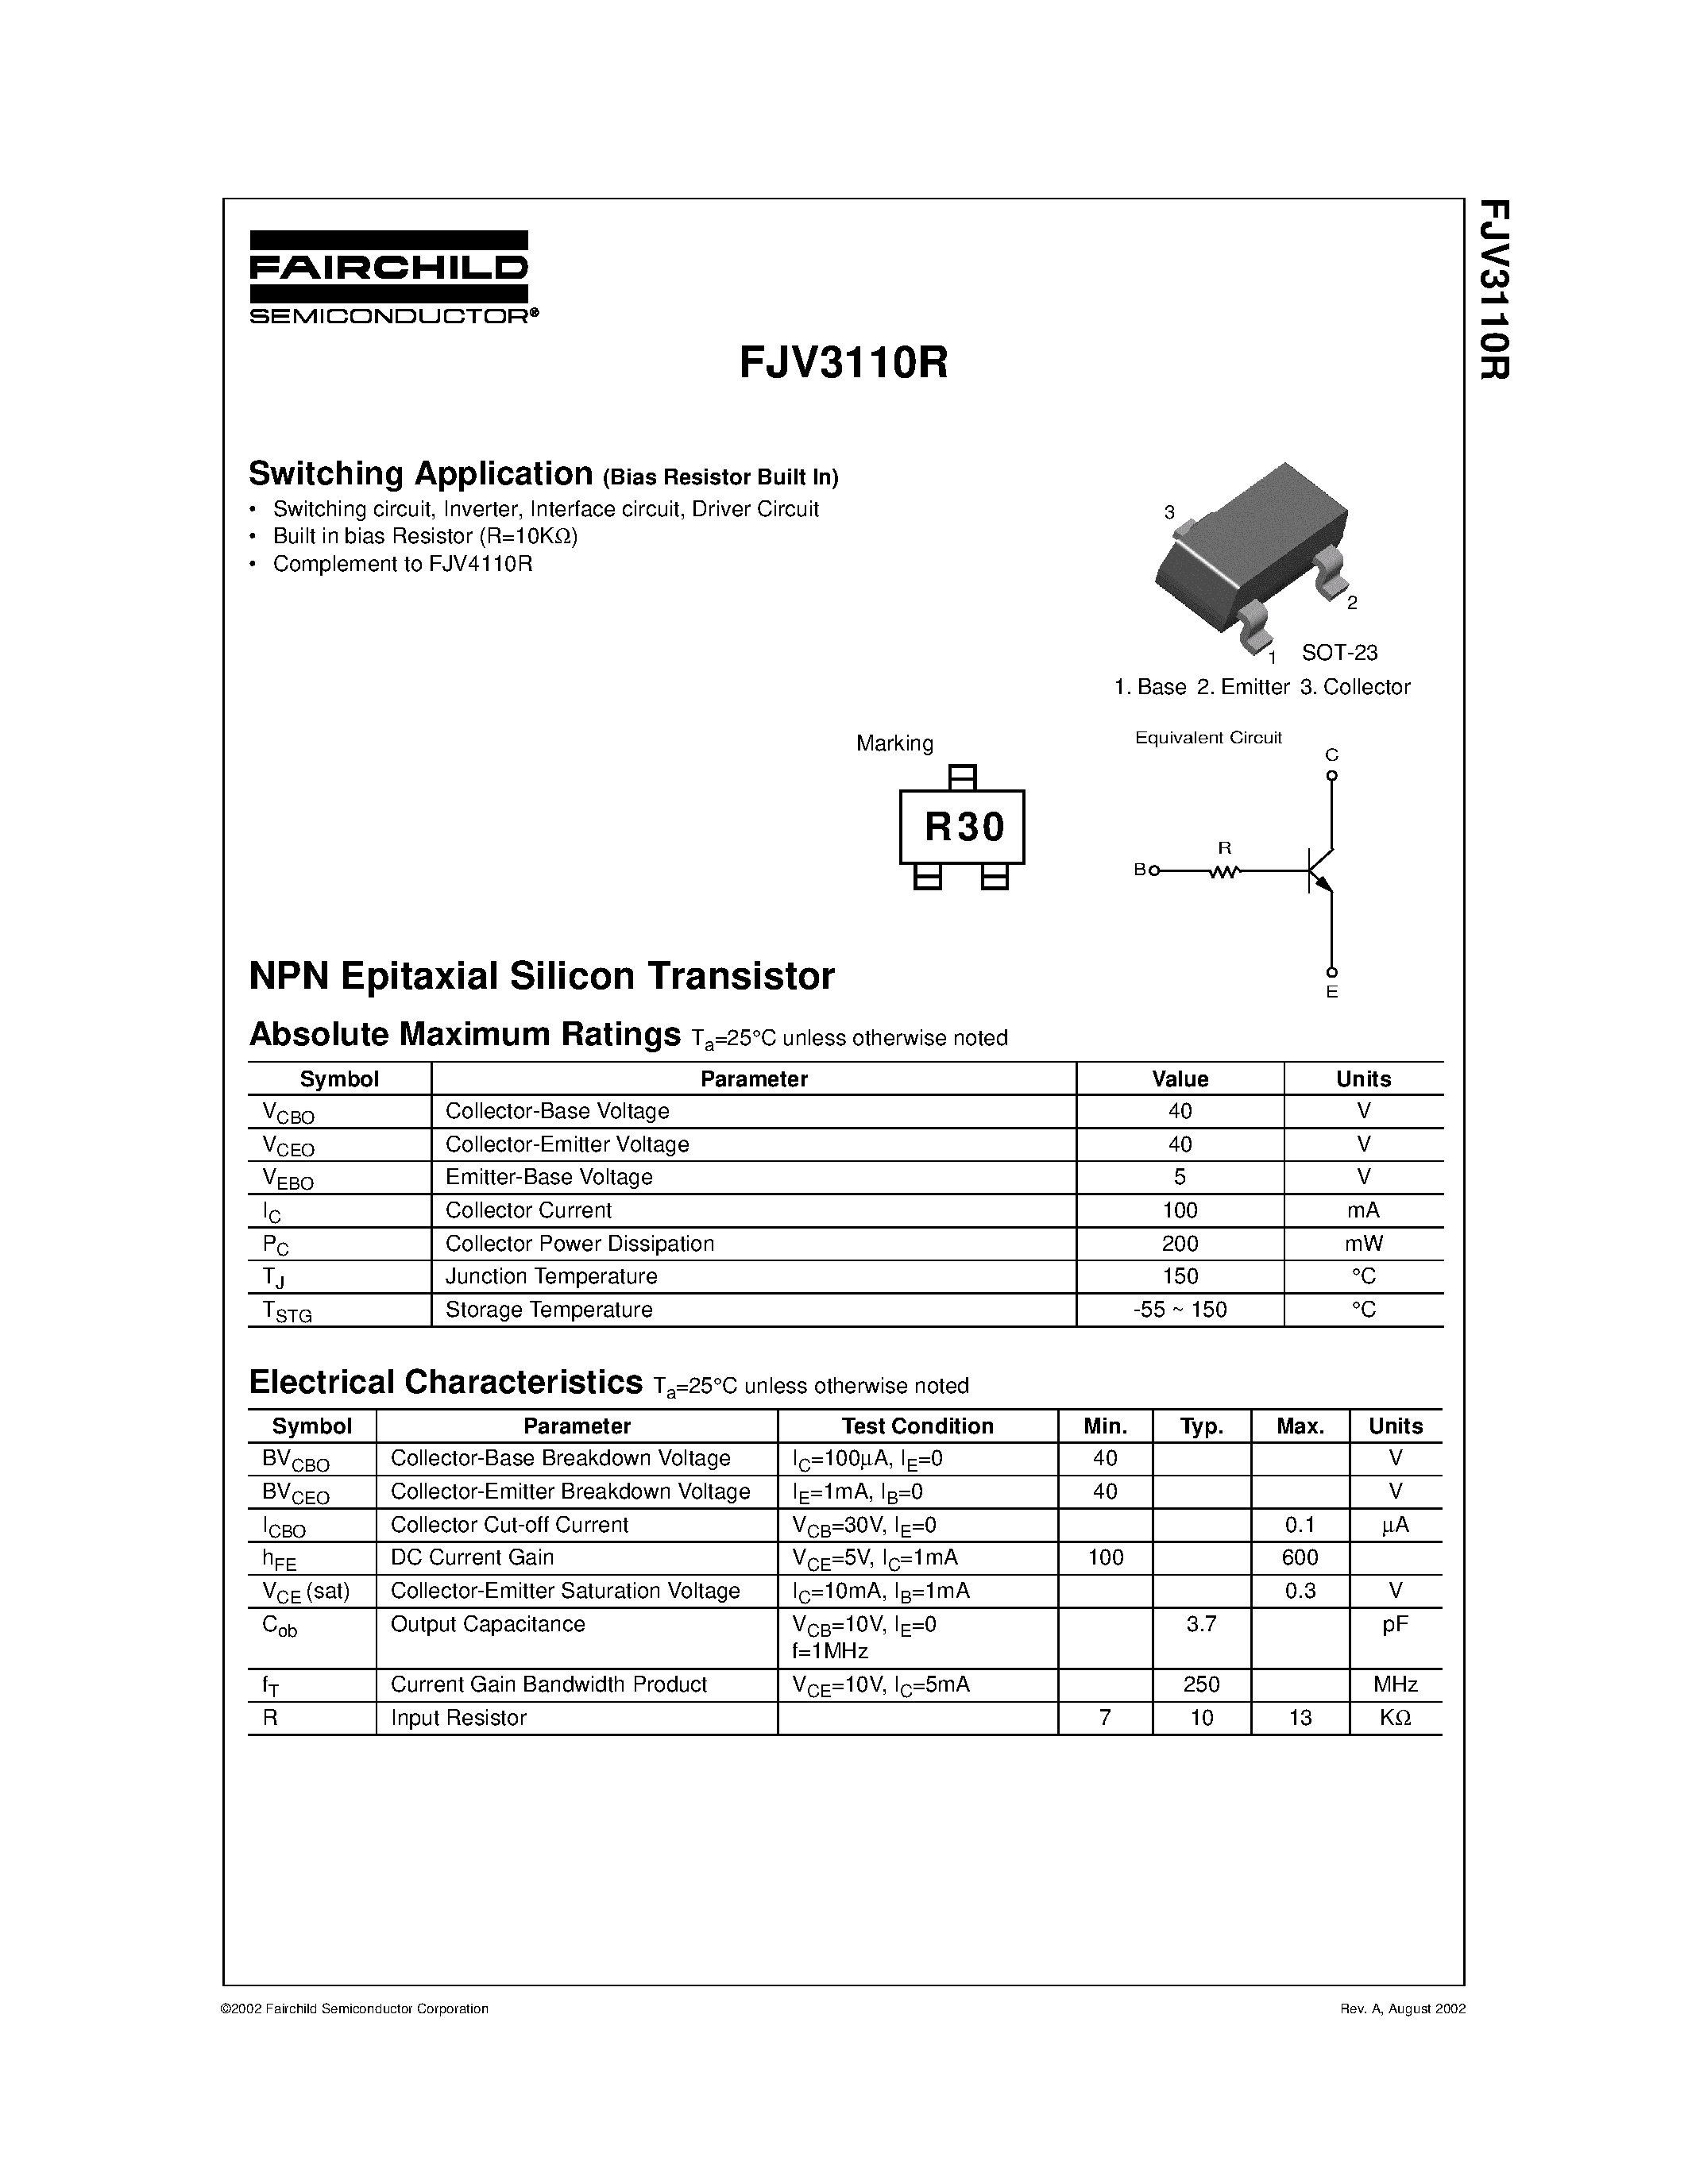 Datasheet FJV3110R - NPN Epitaxial Silicon Transistor page 1